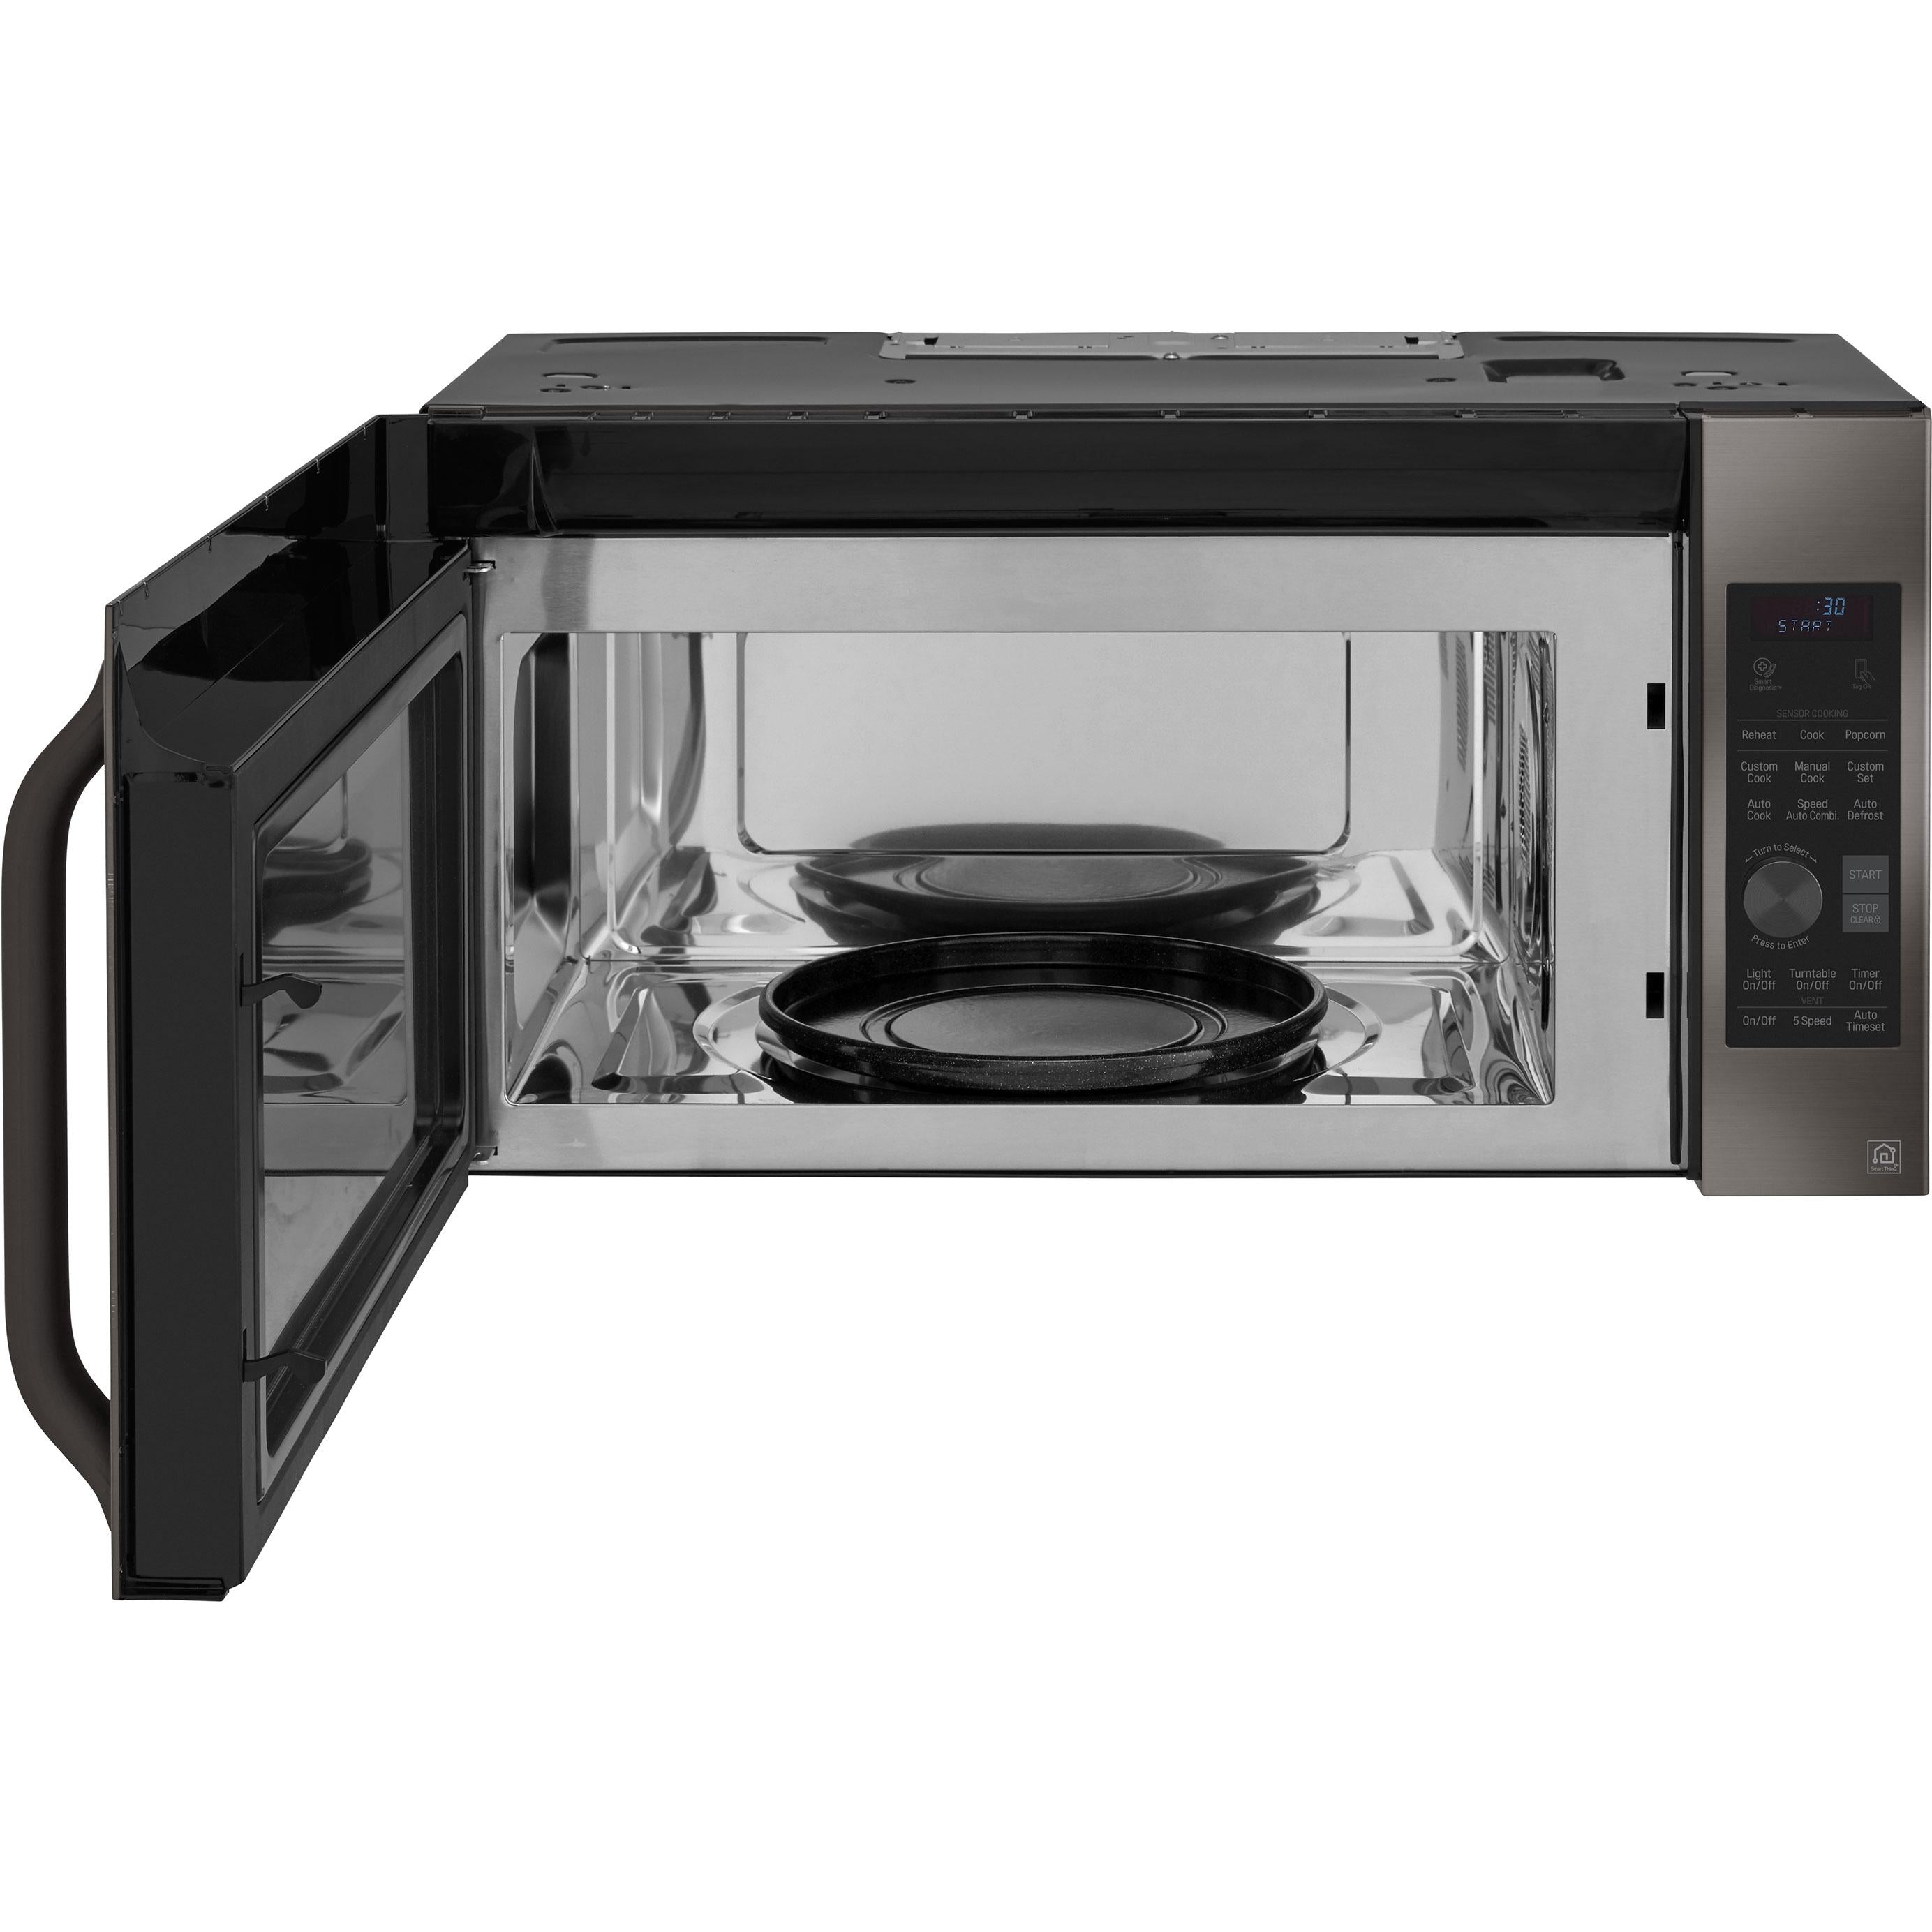 LG STUDIO 30-inch, 1.7 cu. ft. Over-the-Range Microwave Oven with Convection LSMC3089BD